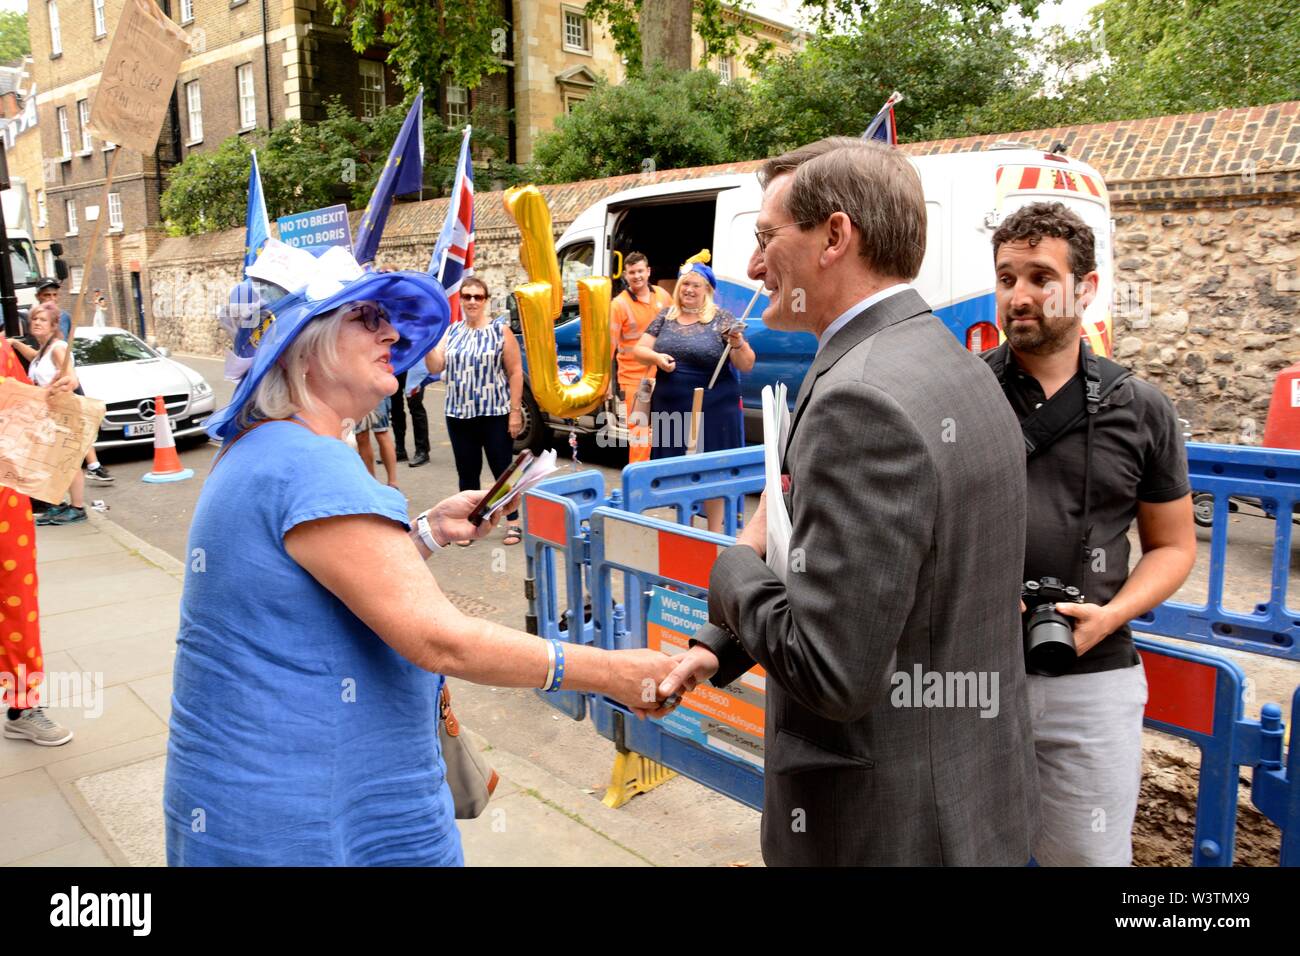 Dominic Grieve shakes hands with Remain demonstrators outside Boris Johnson's bold hole in Great College St, London. Stock Photo